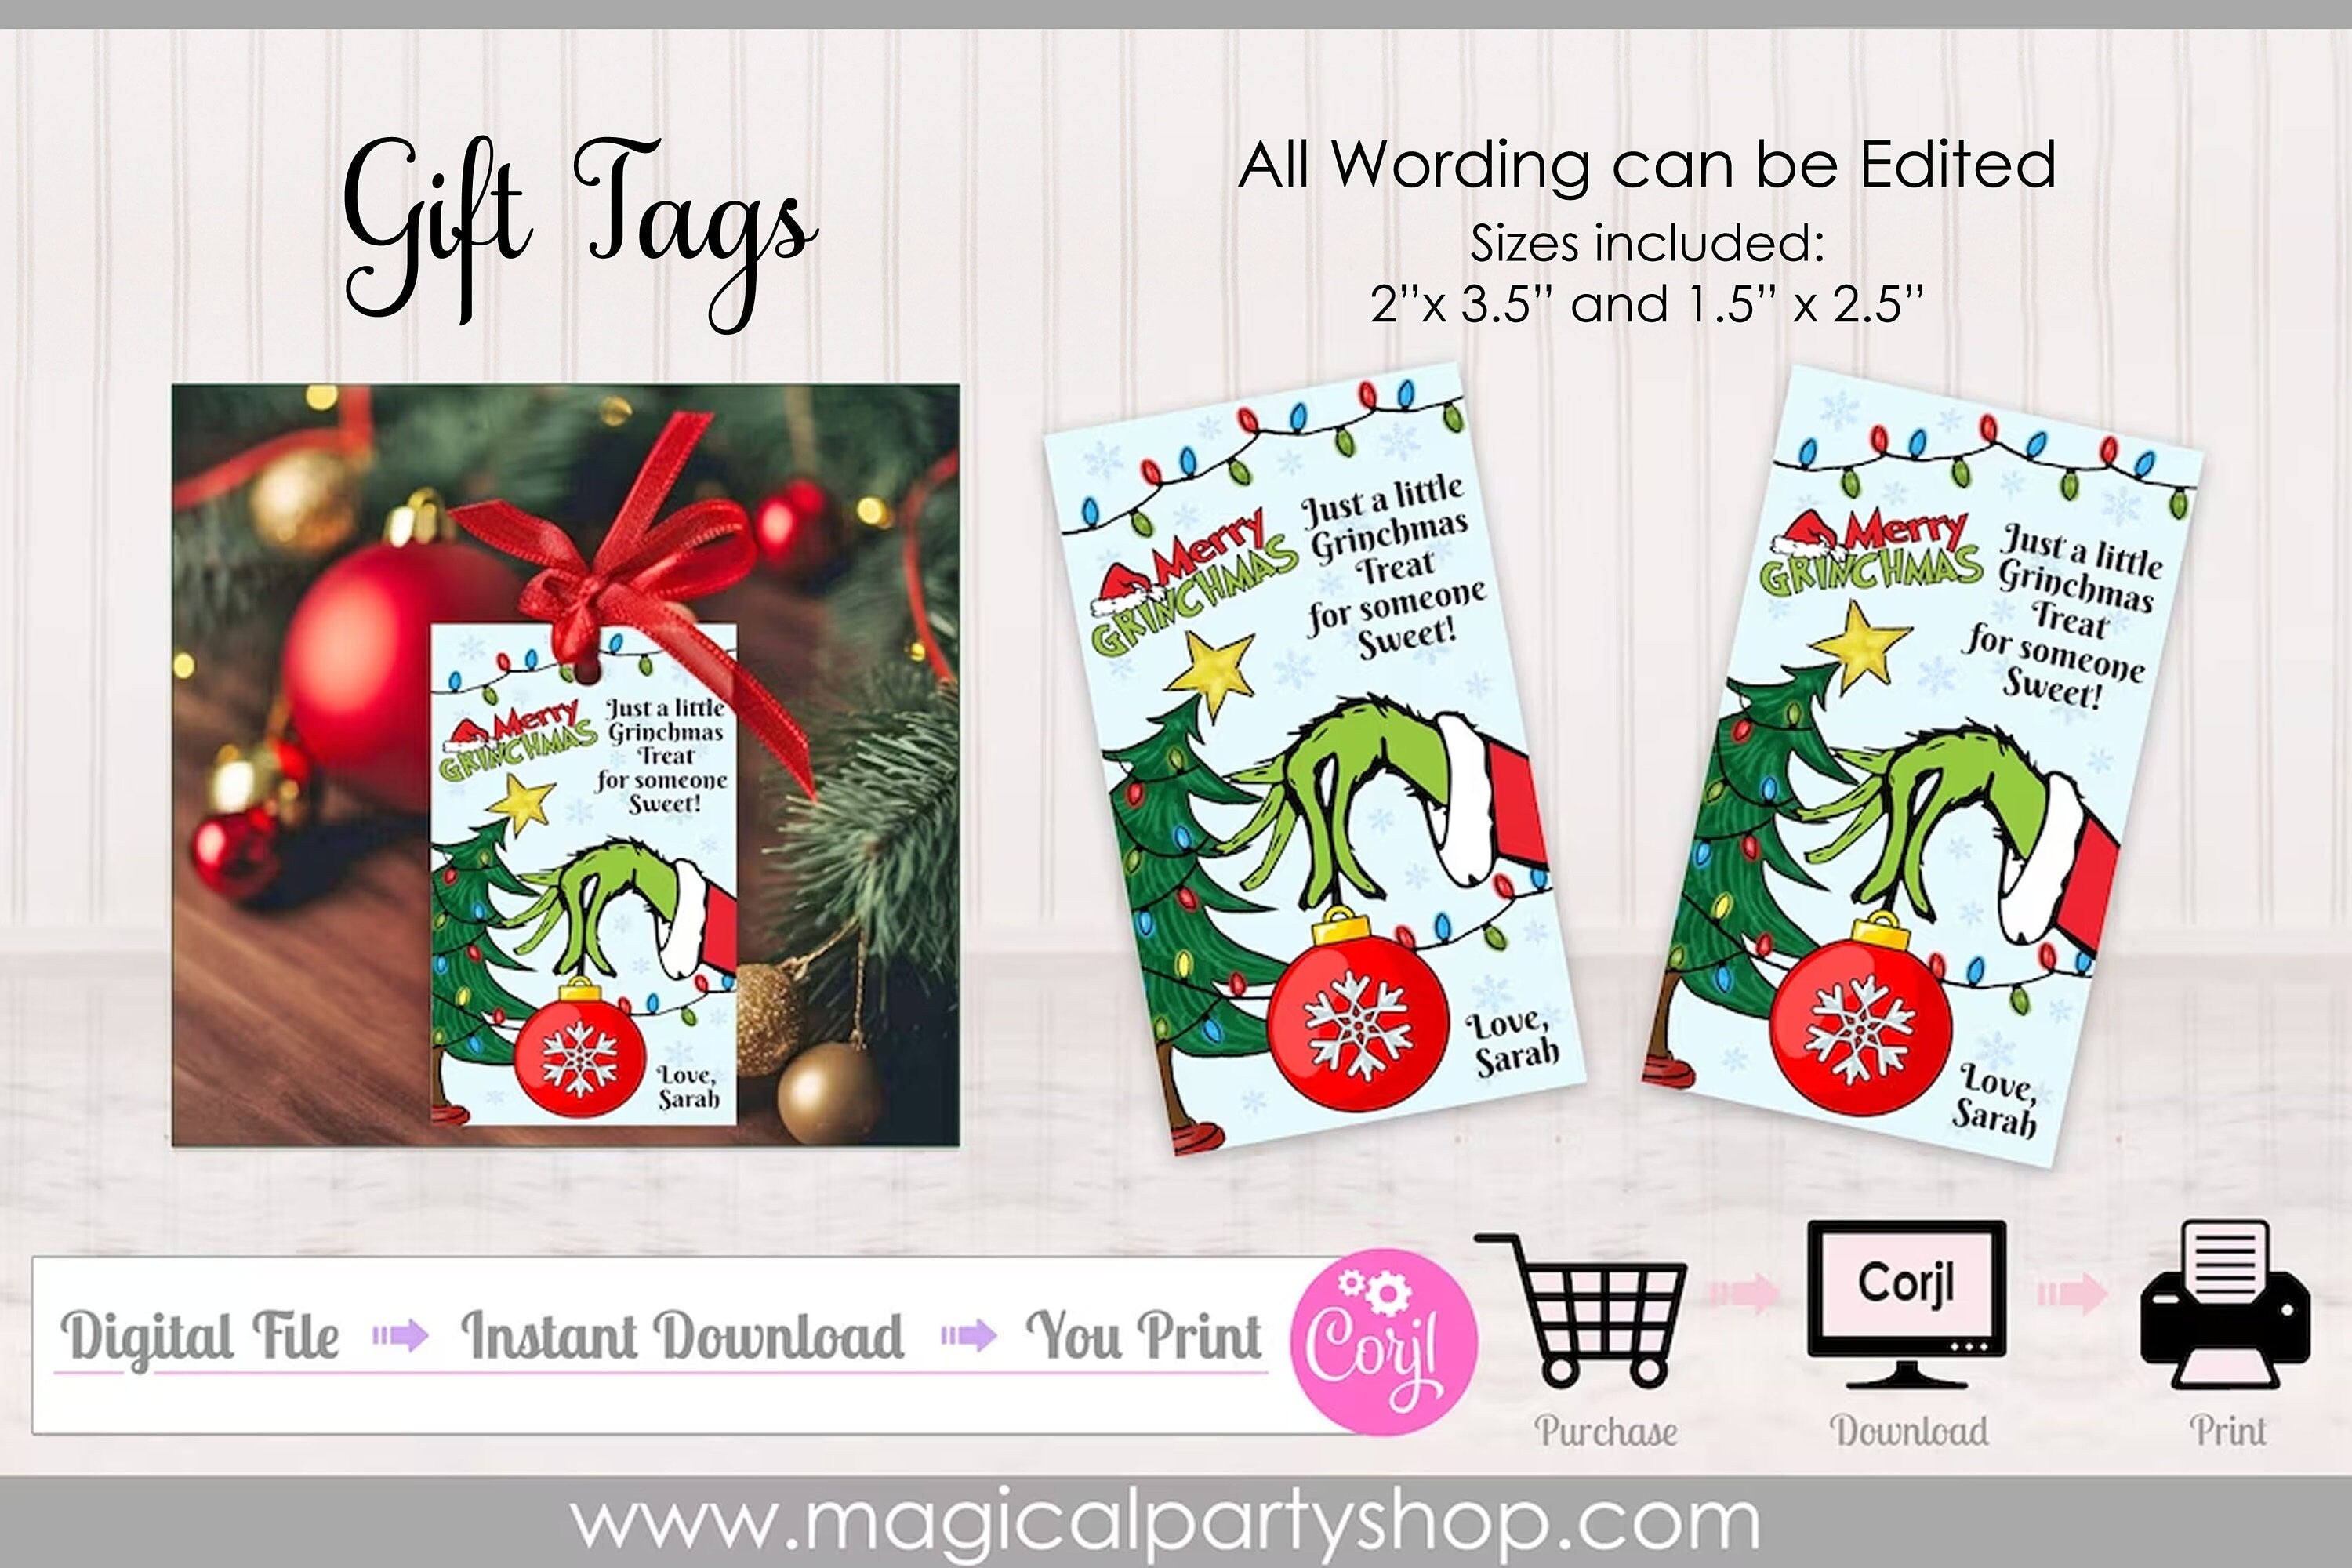 Christmas Gift Tags | Christmas Cards | Class Christmas Party | Class Party | Christmas Gift| Instant Download | Party Favor | Teachers Gift